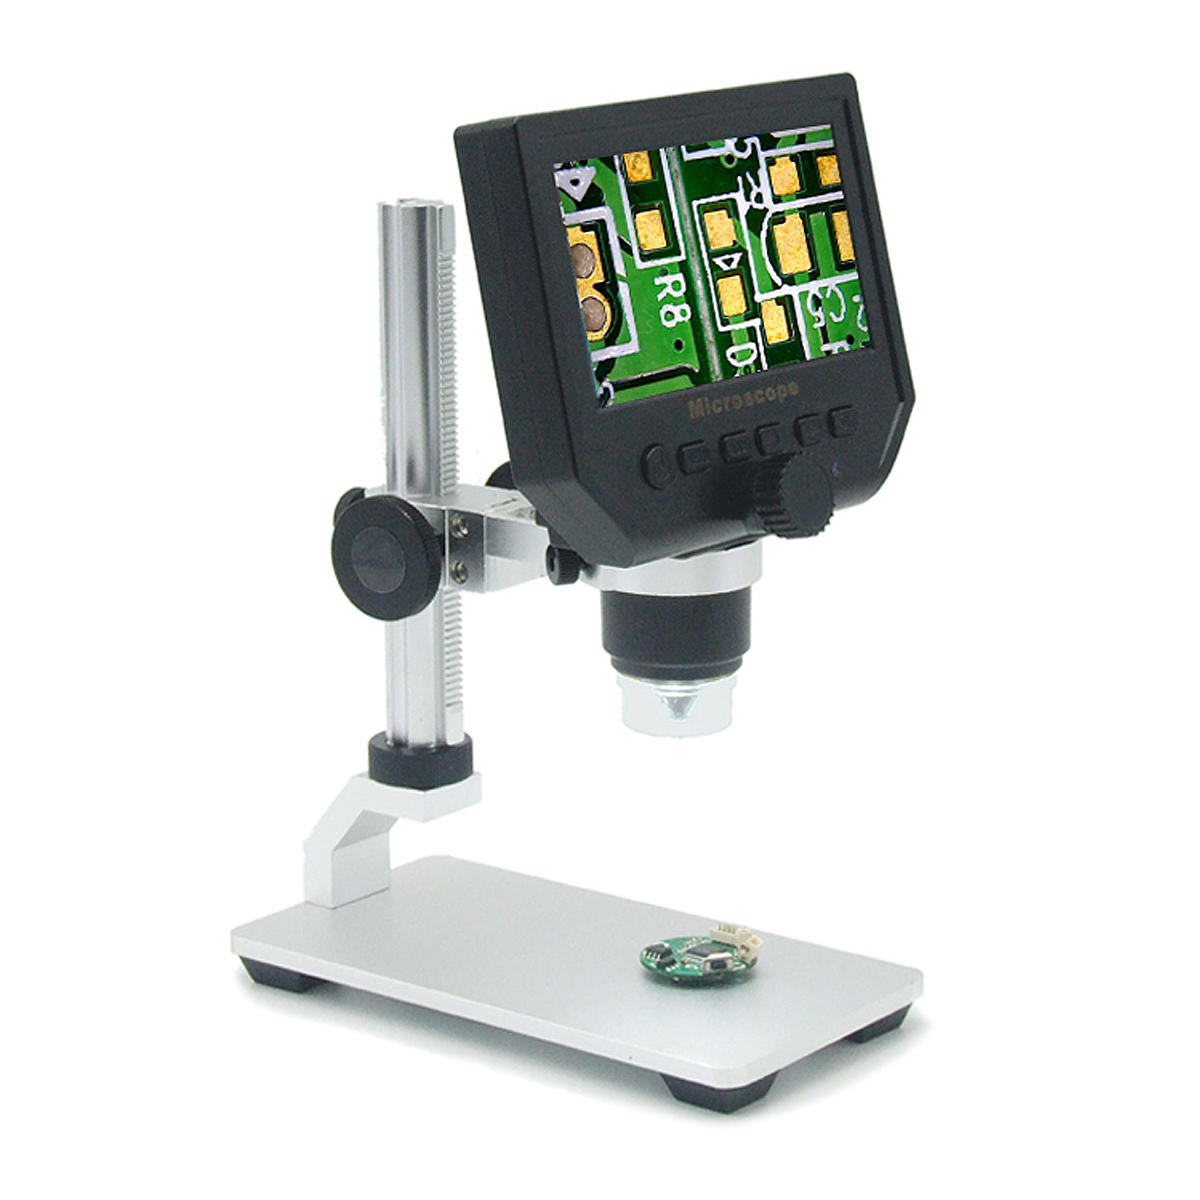 Mustool G600 Digital 1-600X 3.6MP 4.3inch HD LCD Display Microscope Continuous Magnifier with Aluminum Alloy Stand Upgrade Version 14